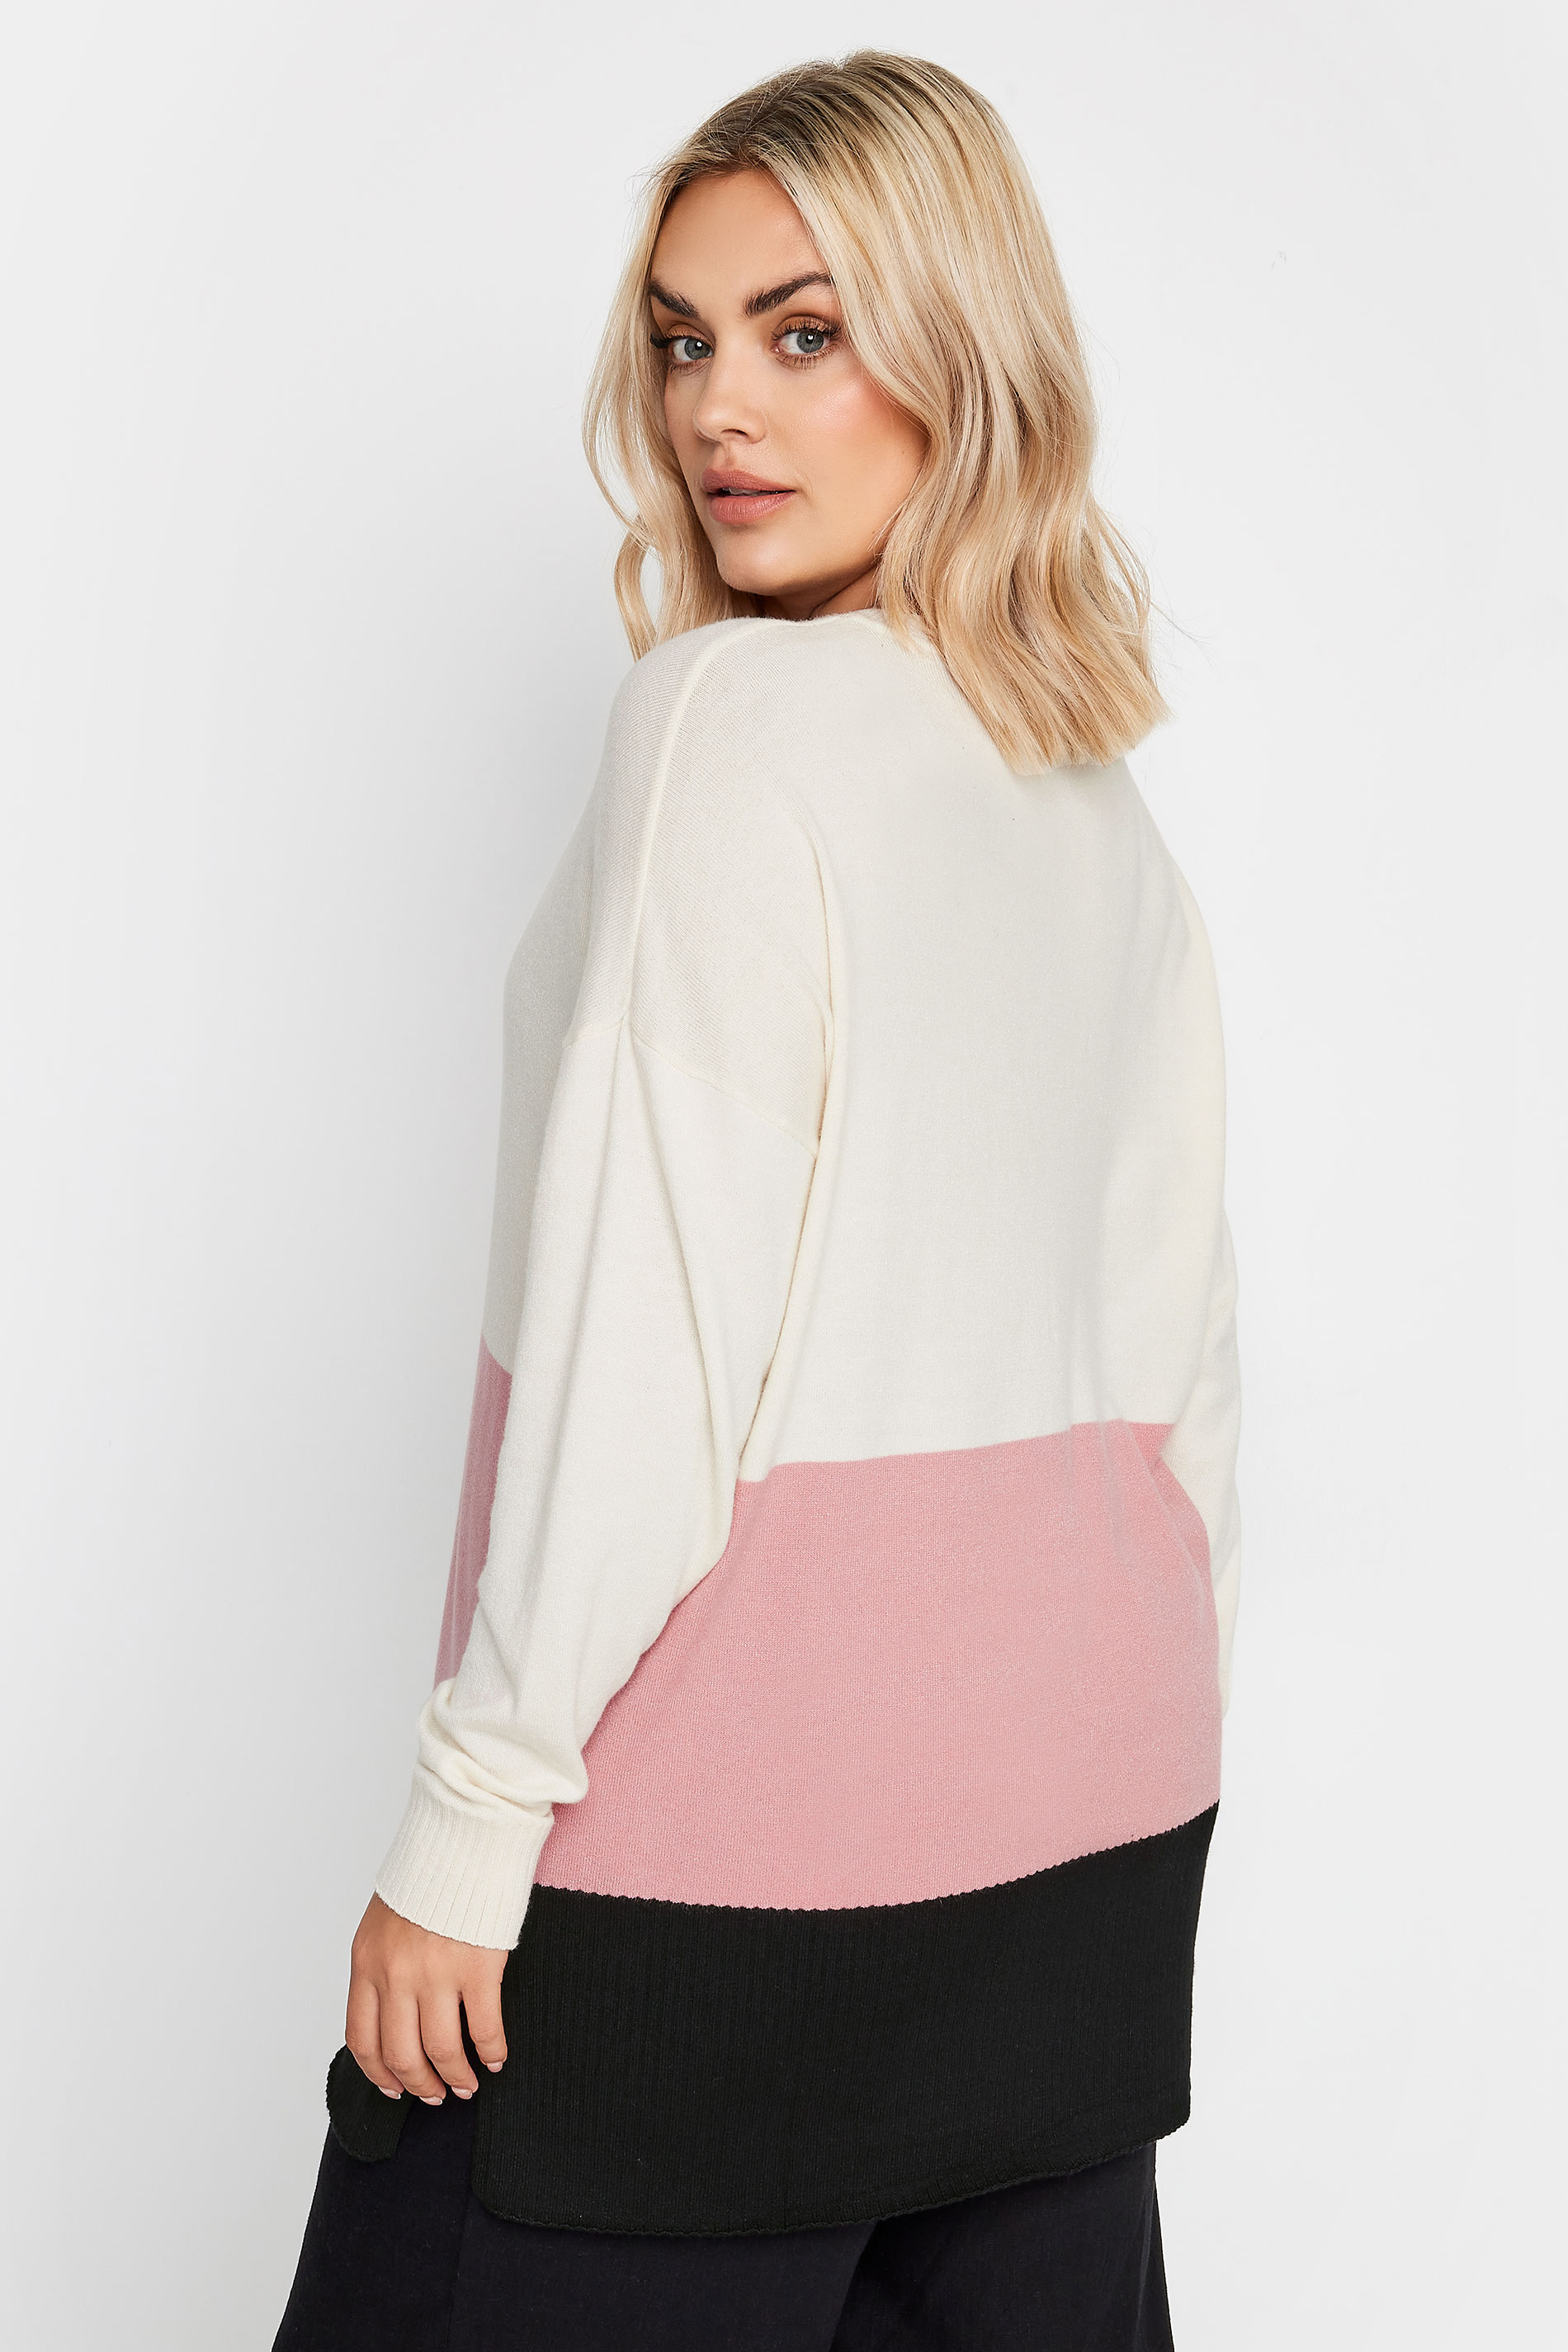 YOURS Plus Size White & Pink Colourblock Jumper | Yours Clothing 3